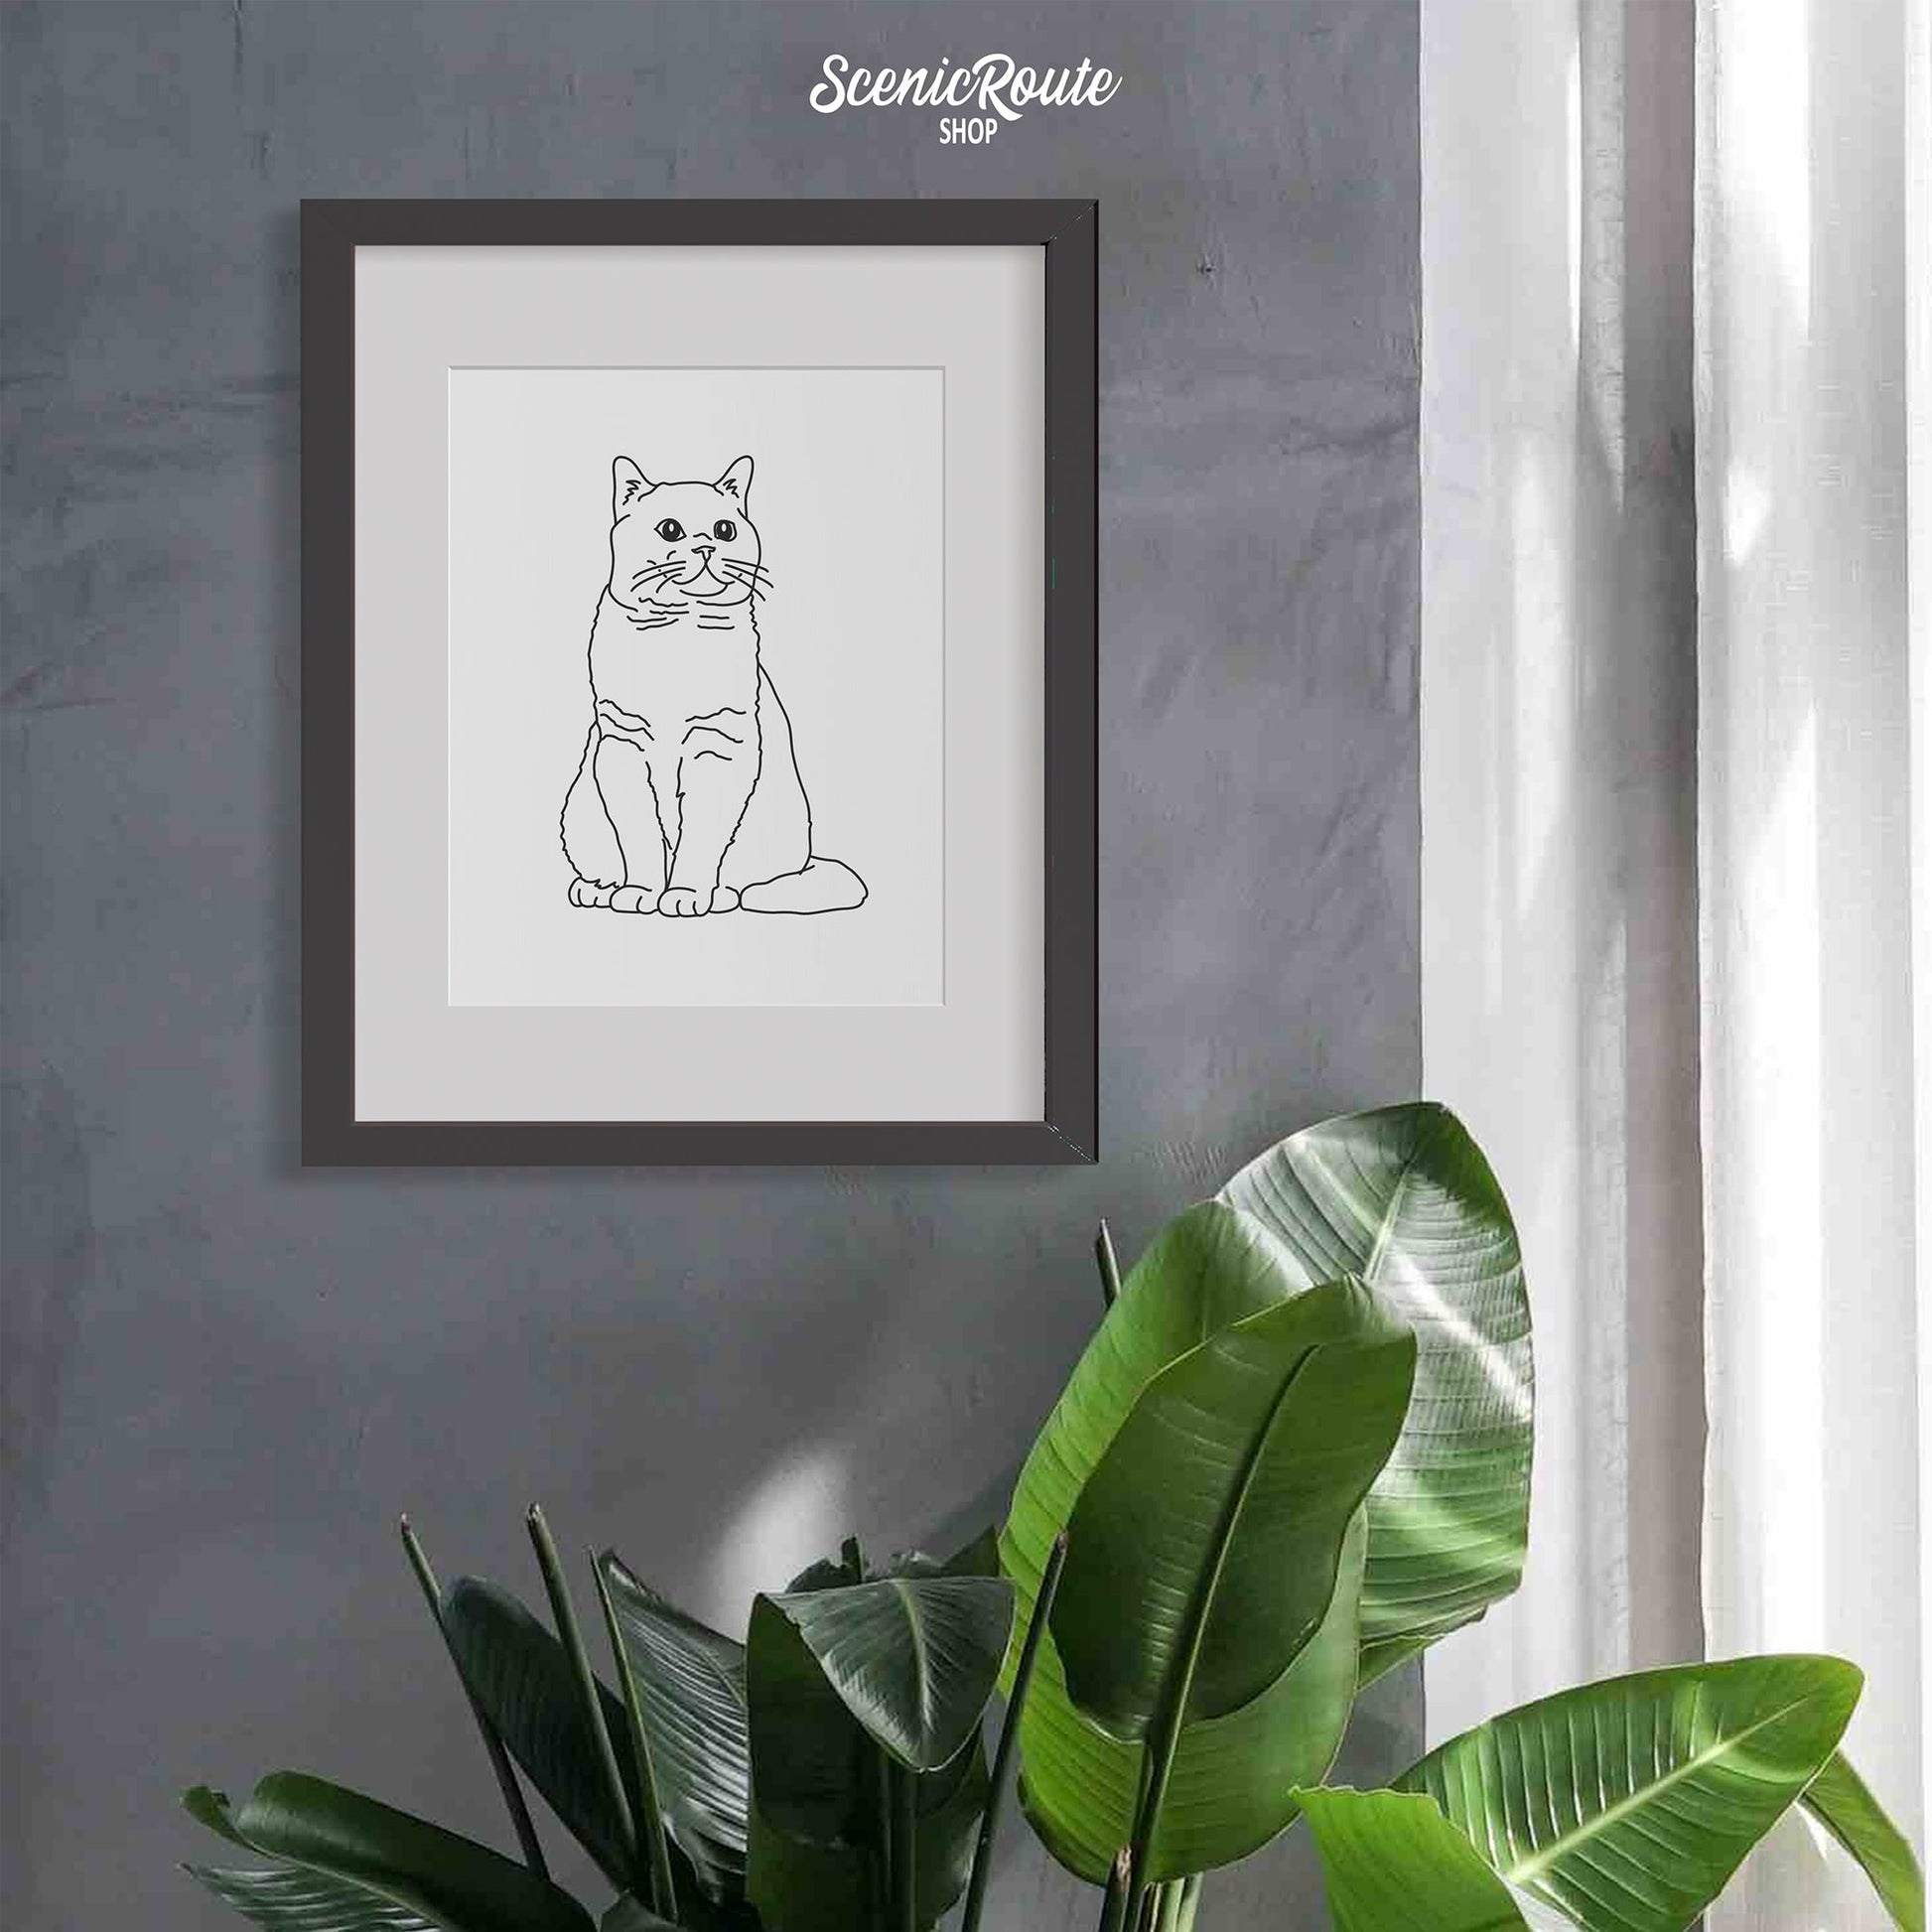 A framed line art drawing of a British Shorthair cat hanging on a gray wall with a plant below